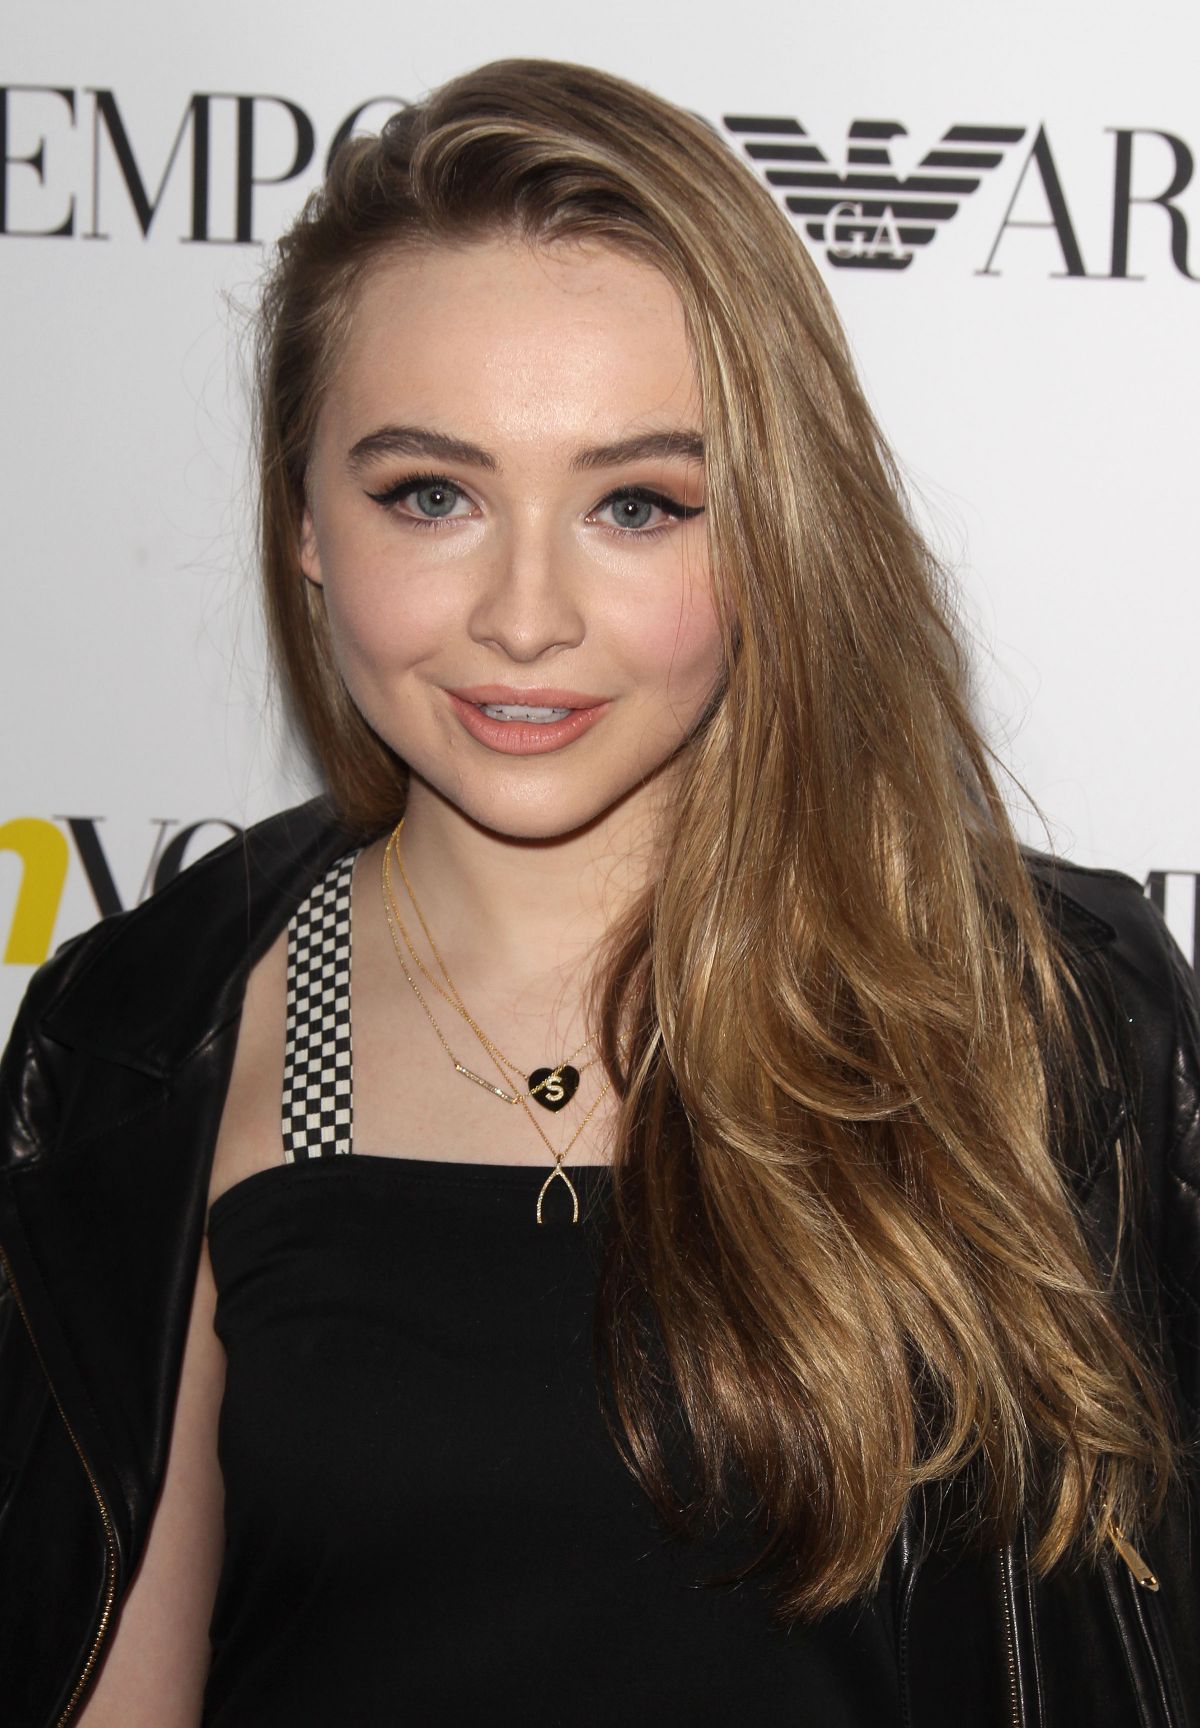 SABRINA CARPENTER at Teen Vogue’s 13th Annual Young Hollywood Issue